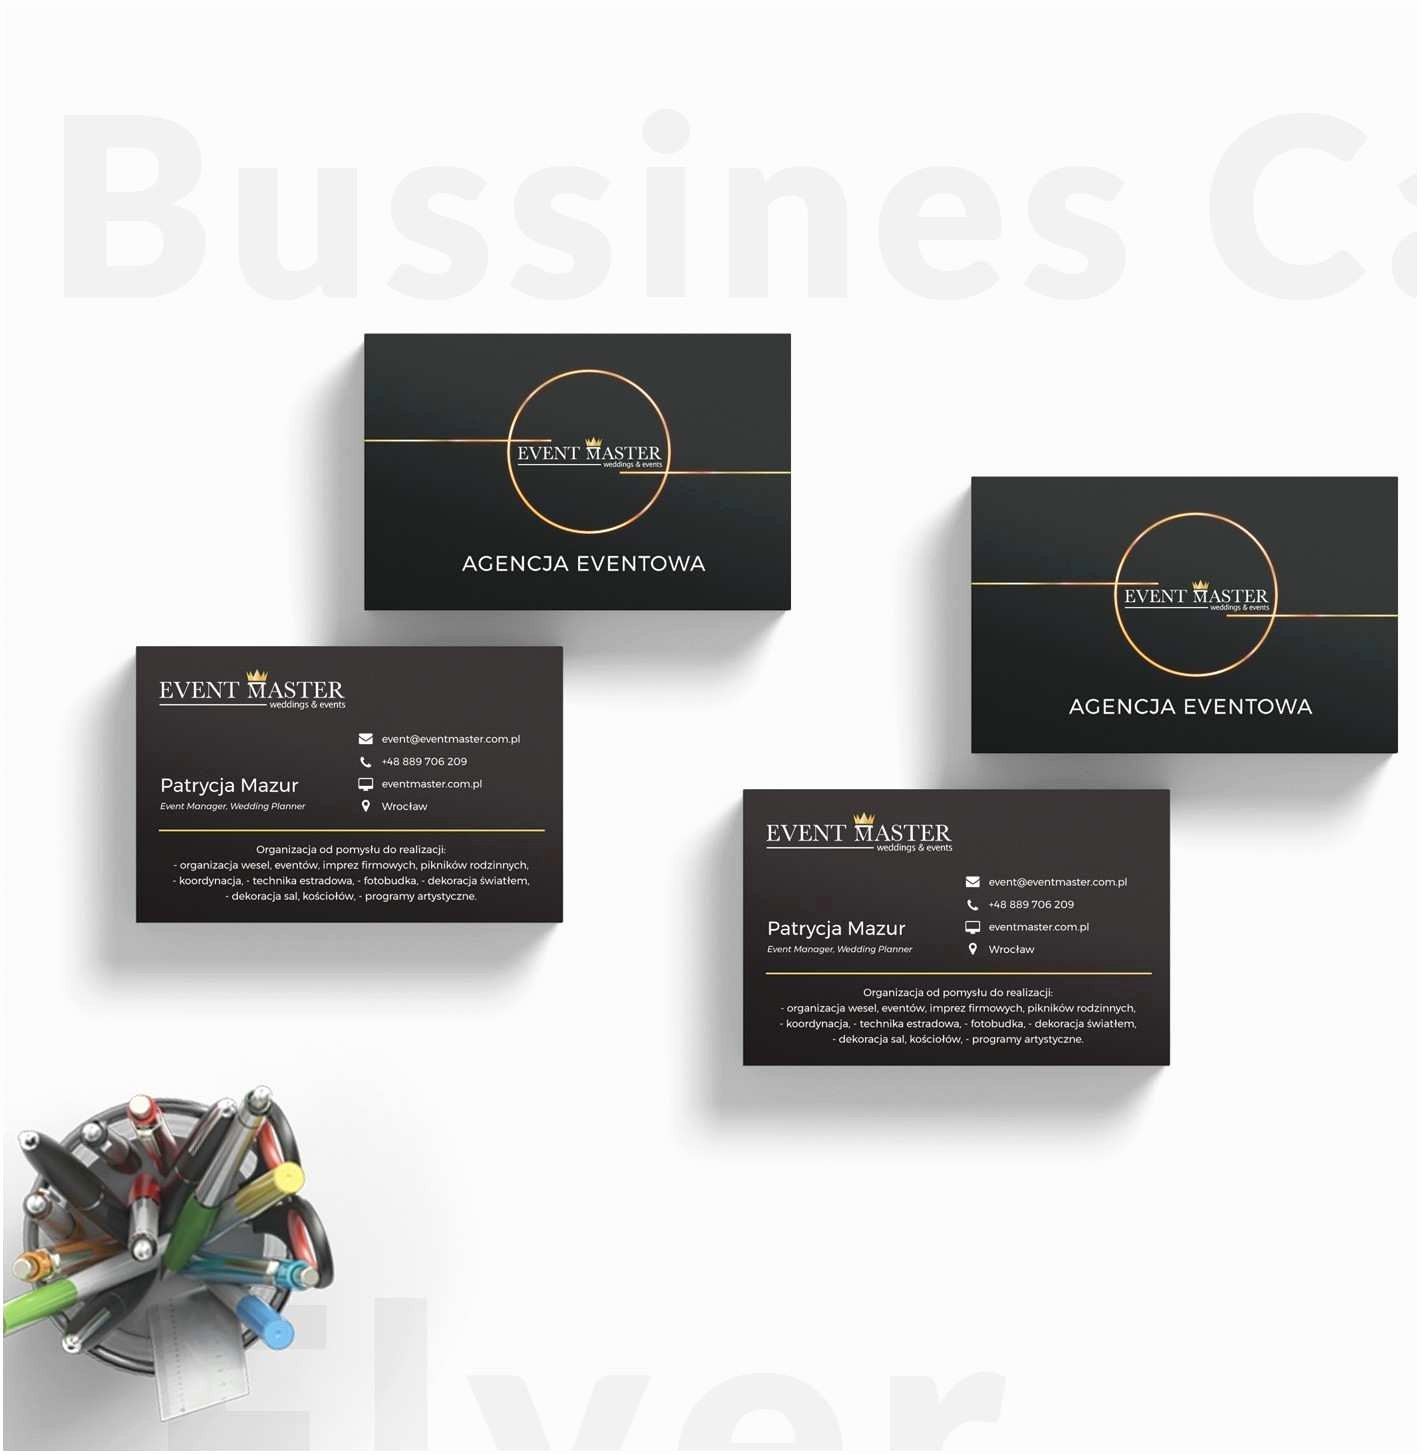 local business card printing example small engine repair business card templates also 34 awesome business of local business card printing